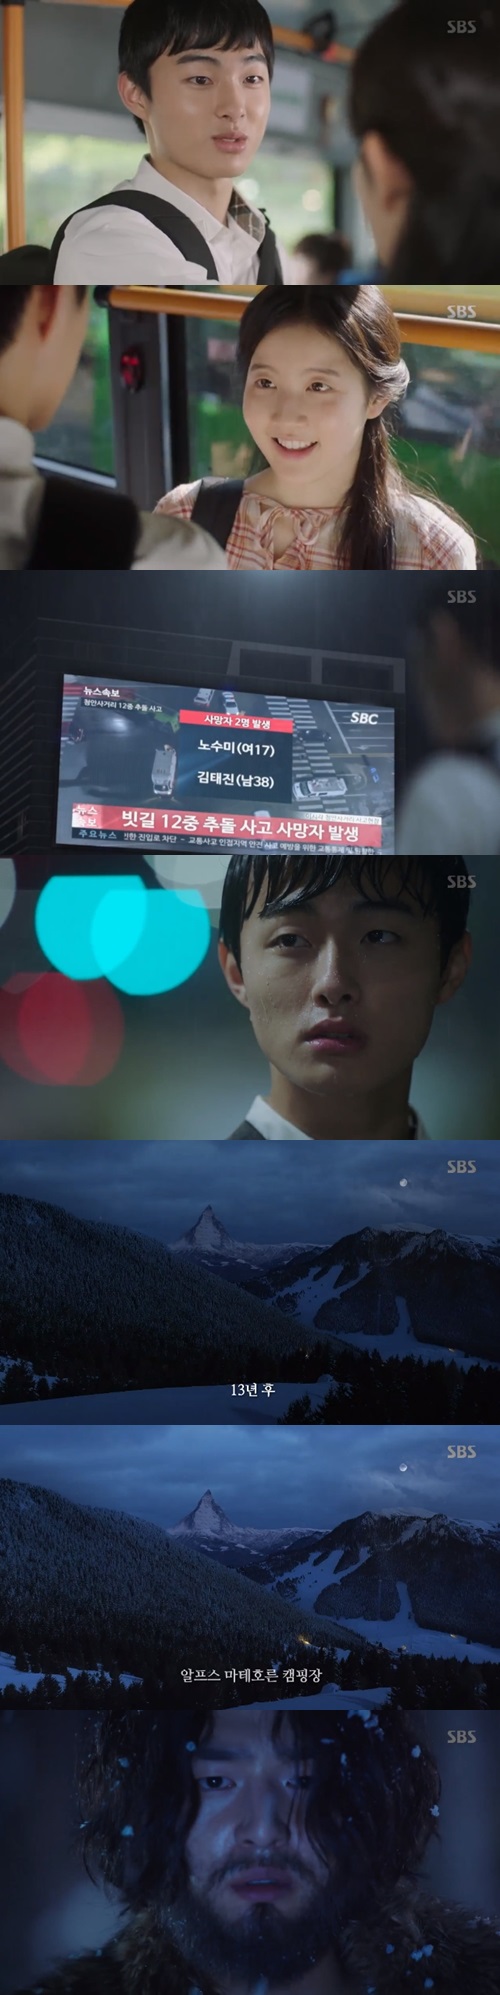 Yang Se-jong was only blinded to think Shin Hye-sun was dead.On July 23, first broadcast SBS New Moon TV drama Thirty but Seventeen (playplay by Cho Sung-hee/director Cho Soo-won) was misunderstood only as the death of Shin Hye-sun.Young Woo-jin was at first sight to the young Usuri, and when he saw his friend Nosumis gym suit, he misunderstood Usuris name as Nosumi.Gong Woo-jin painted Utheris picture, and when Utheri, who accidentally encountered on the bus, asked the bus stop, he tried to present the picture.However, when Nosumi got on the bus and talked to Utheri, the embarrassed Gong Woo-jin first got off.Gong Woo-jin was surprised to find out that a small bell key ring hanging from Uthers bag was attached to my bag after getting off the bus.Gong U-jin was chasing the bus to return the bell to Ussary when he witnessed the Acident, which had a large Acident with tires flowing from the truck ahead.When Noh Su-mi was reported as the name of the deceased, Gong Woo-jin was desperate to know that Usari was dead.Gong U-jin regretted the fact that he told Ussari, I have to go to one more stop and get off.After 13 years, Gong Woo-jin, who became an adult, appeared in the Alps Matterhorn camping ground as a lunge, while Uthery was unconscious and in the hospital